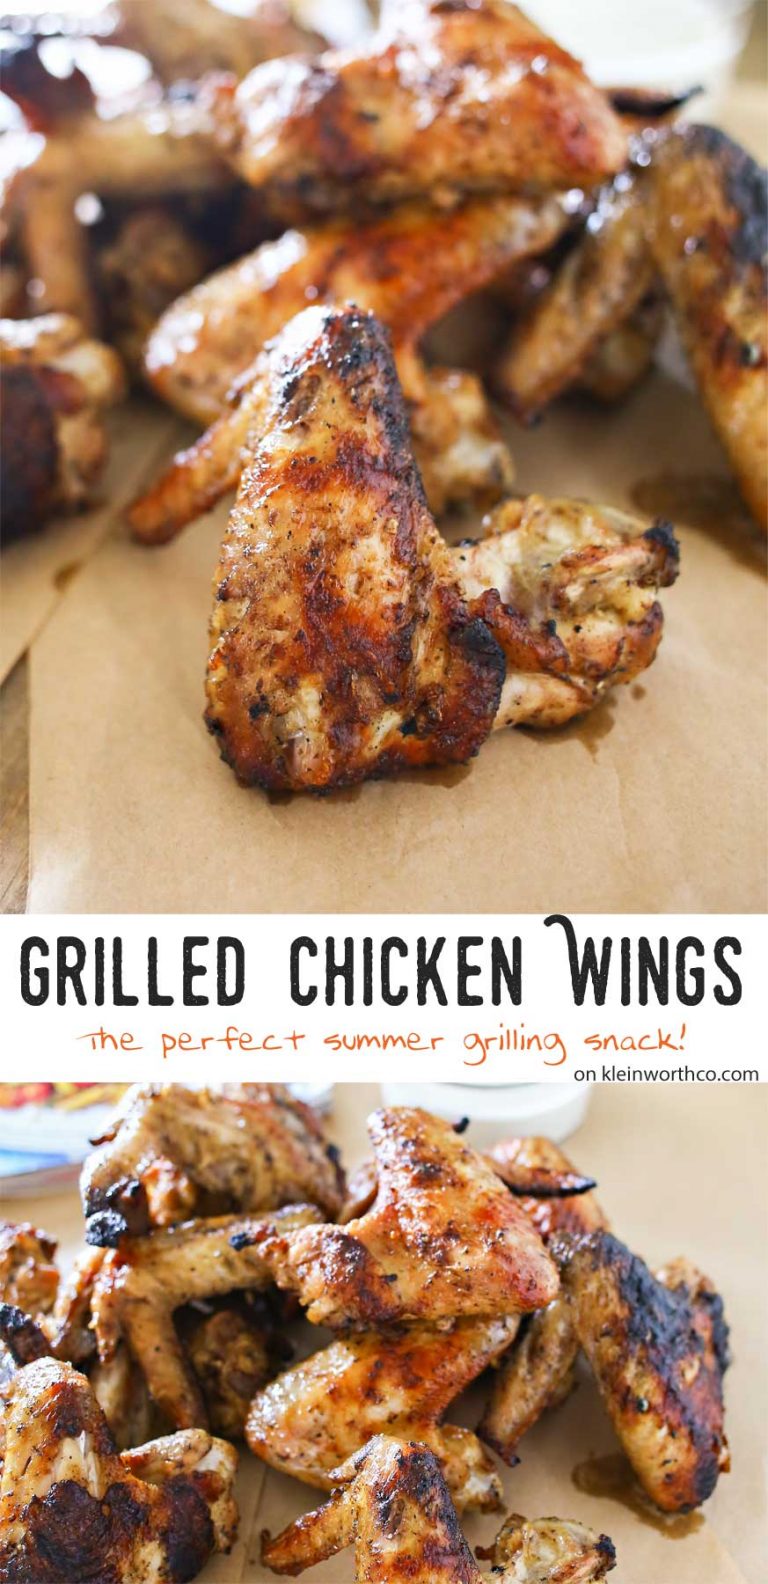 Grilled Chicken Wings - Taste of the Frontier